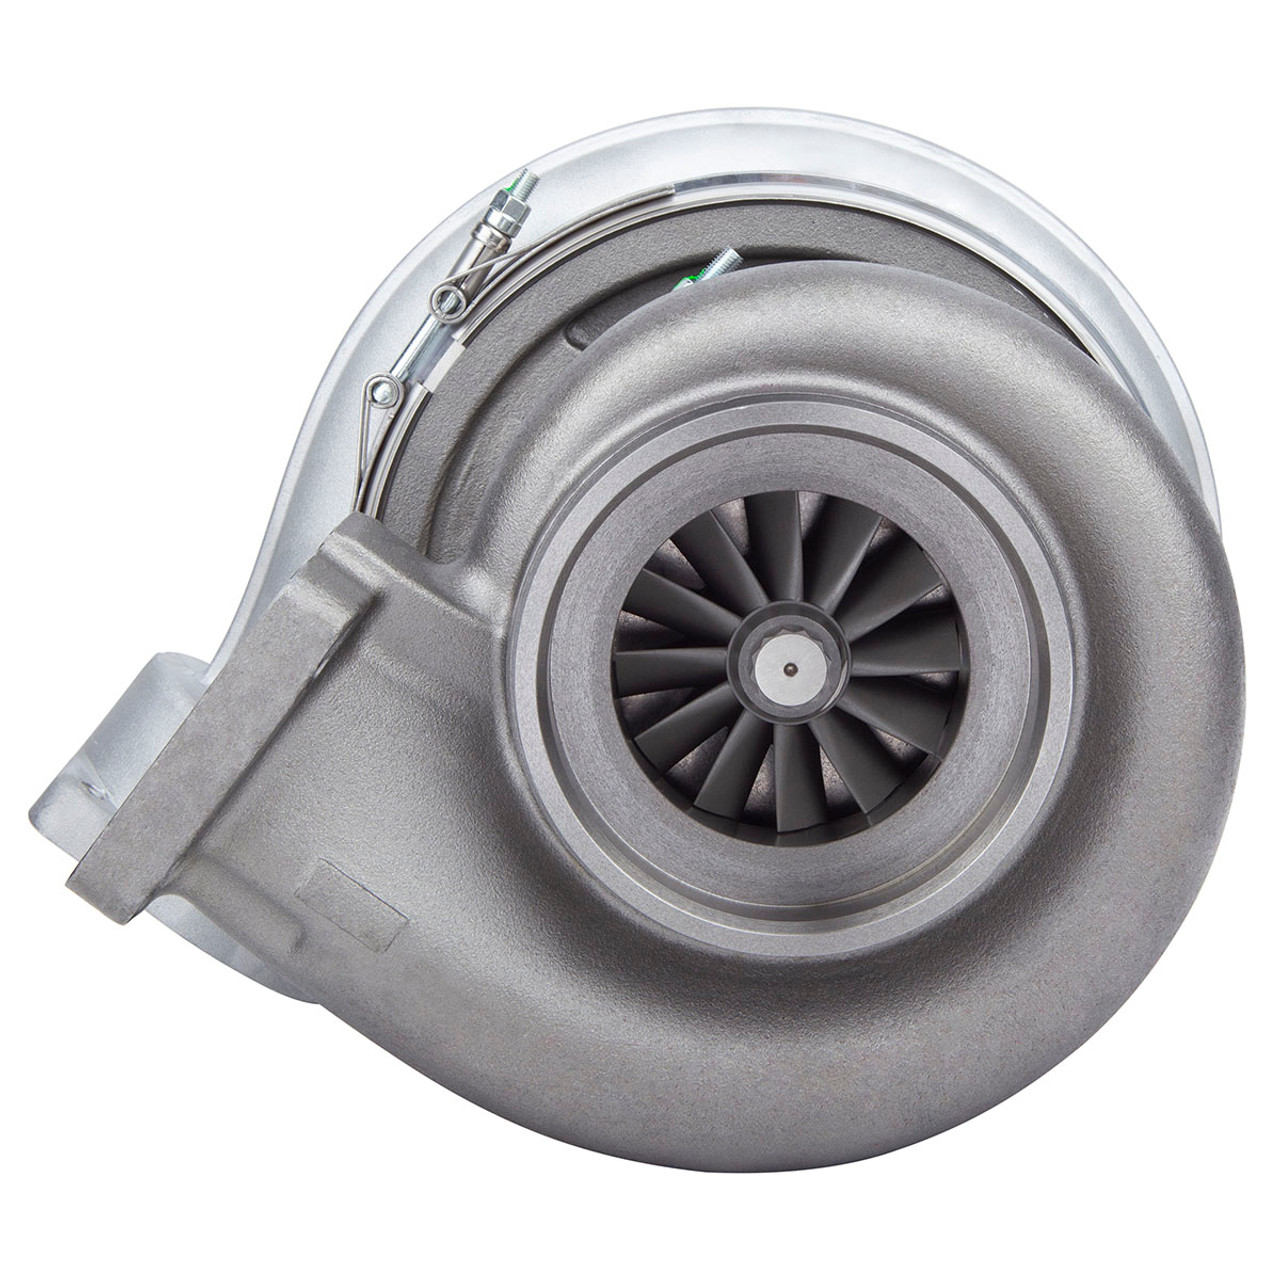 New Factory Turbochargers S4DS Turbo For Caterpillar CAT 3406C 14.6L ...